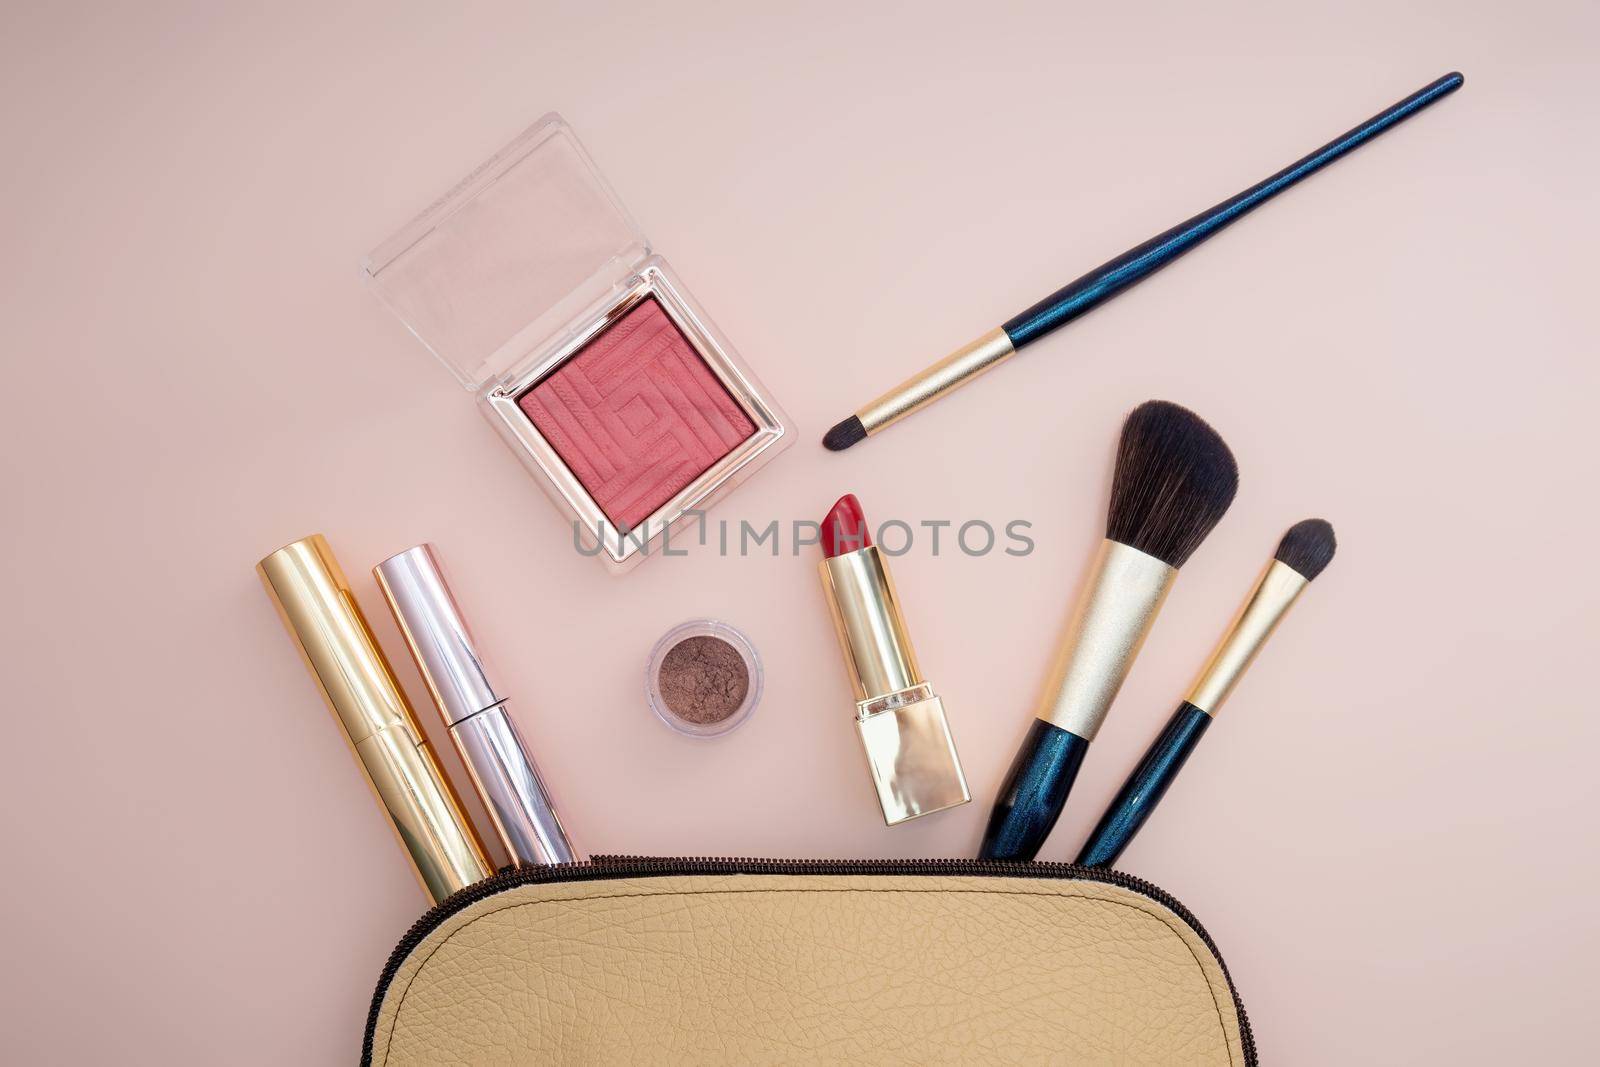 Top view of cosmetics standing out from beige makeup bag on pink background. Photo